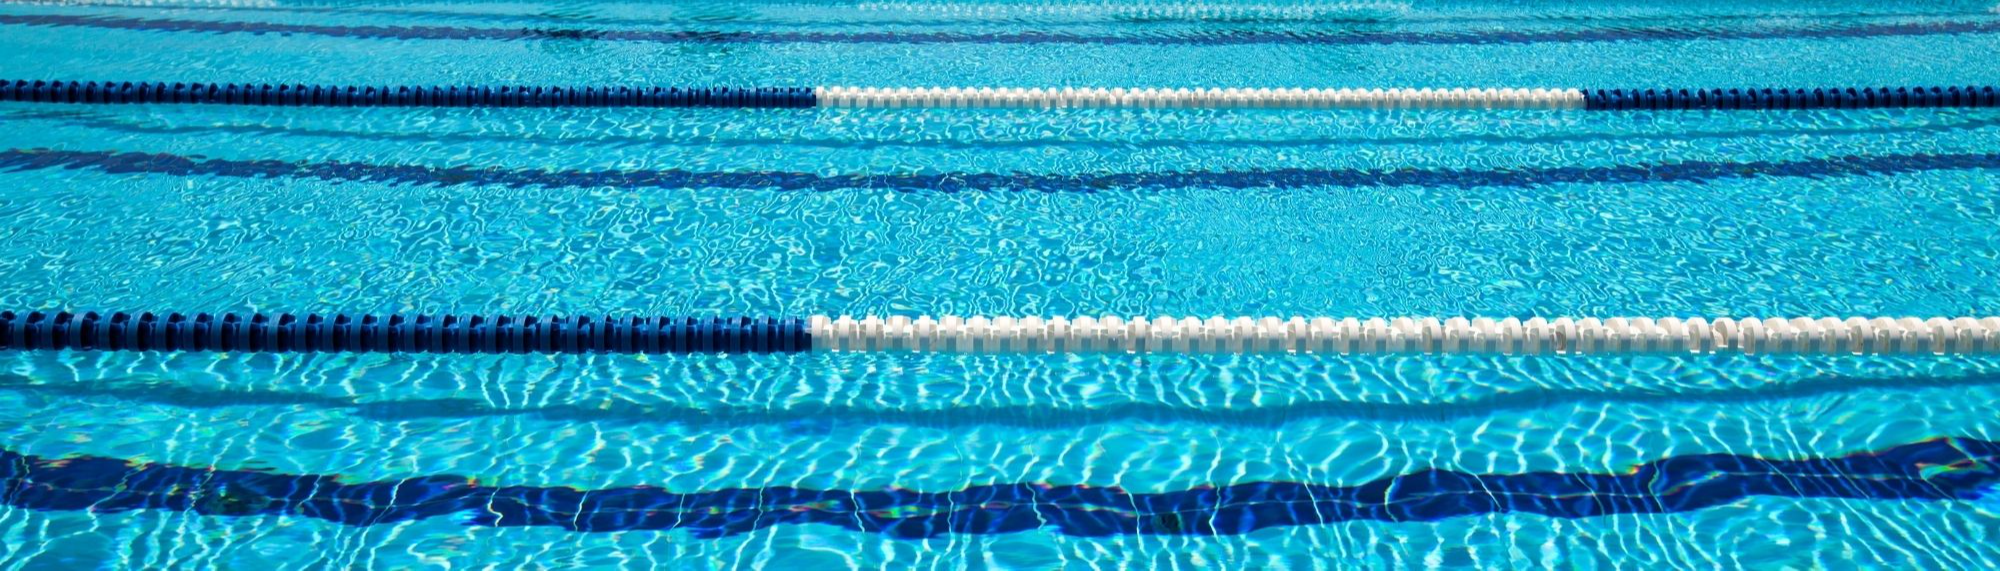 Picture of Swim Lanes at the Pool